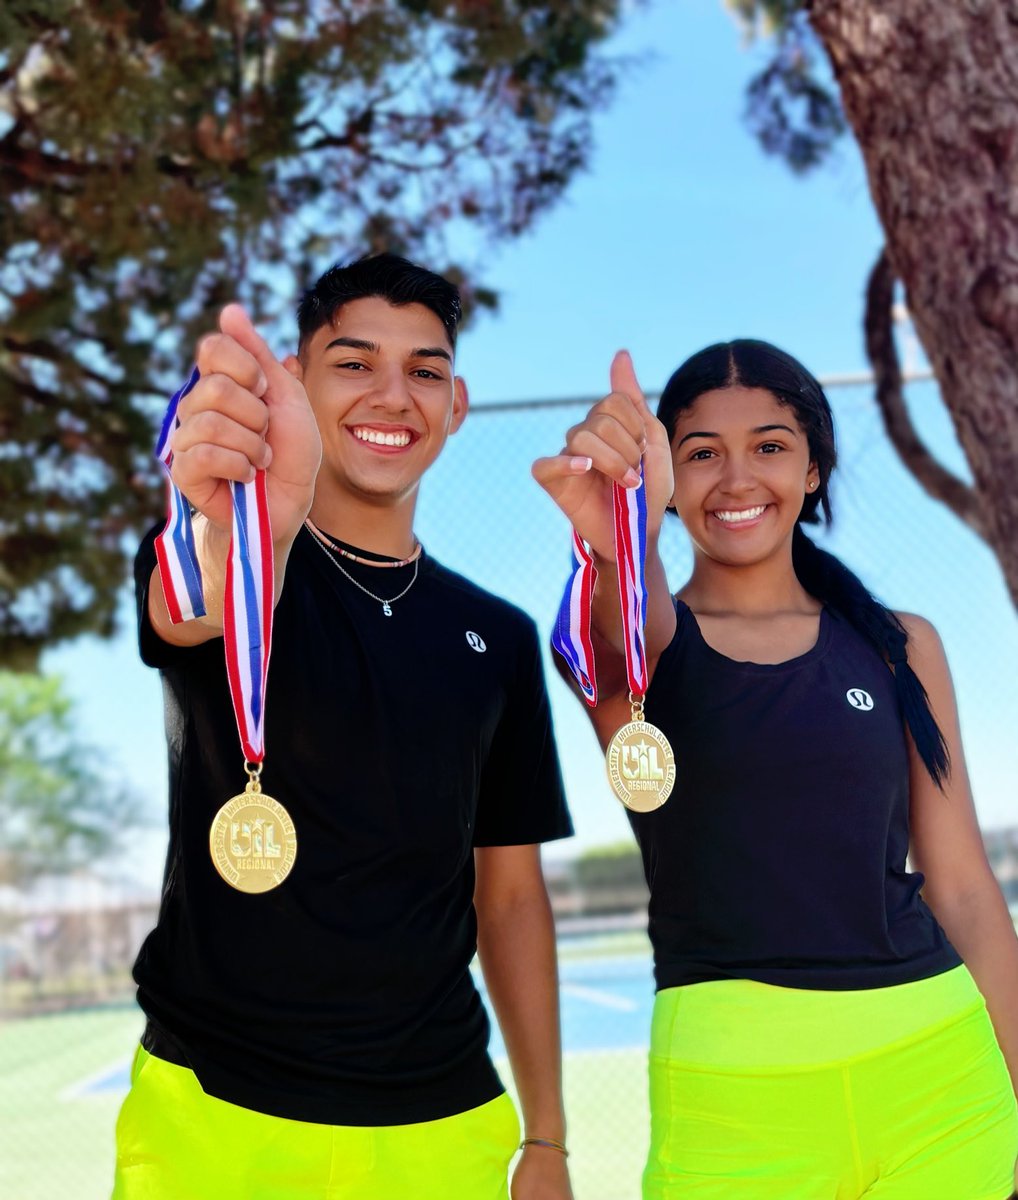 Patton Springs mixed doubles team of Toryan Childers and Diezel Ramirez beat a team from Nazareth 6-0, 6-2 winning the Regional Championship, securing their second trip to the State Tournament in San Antonio! Awesomeness from some kids in Afton!